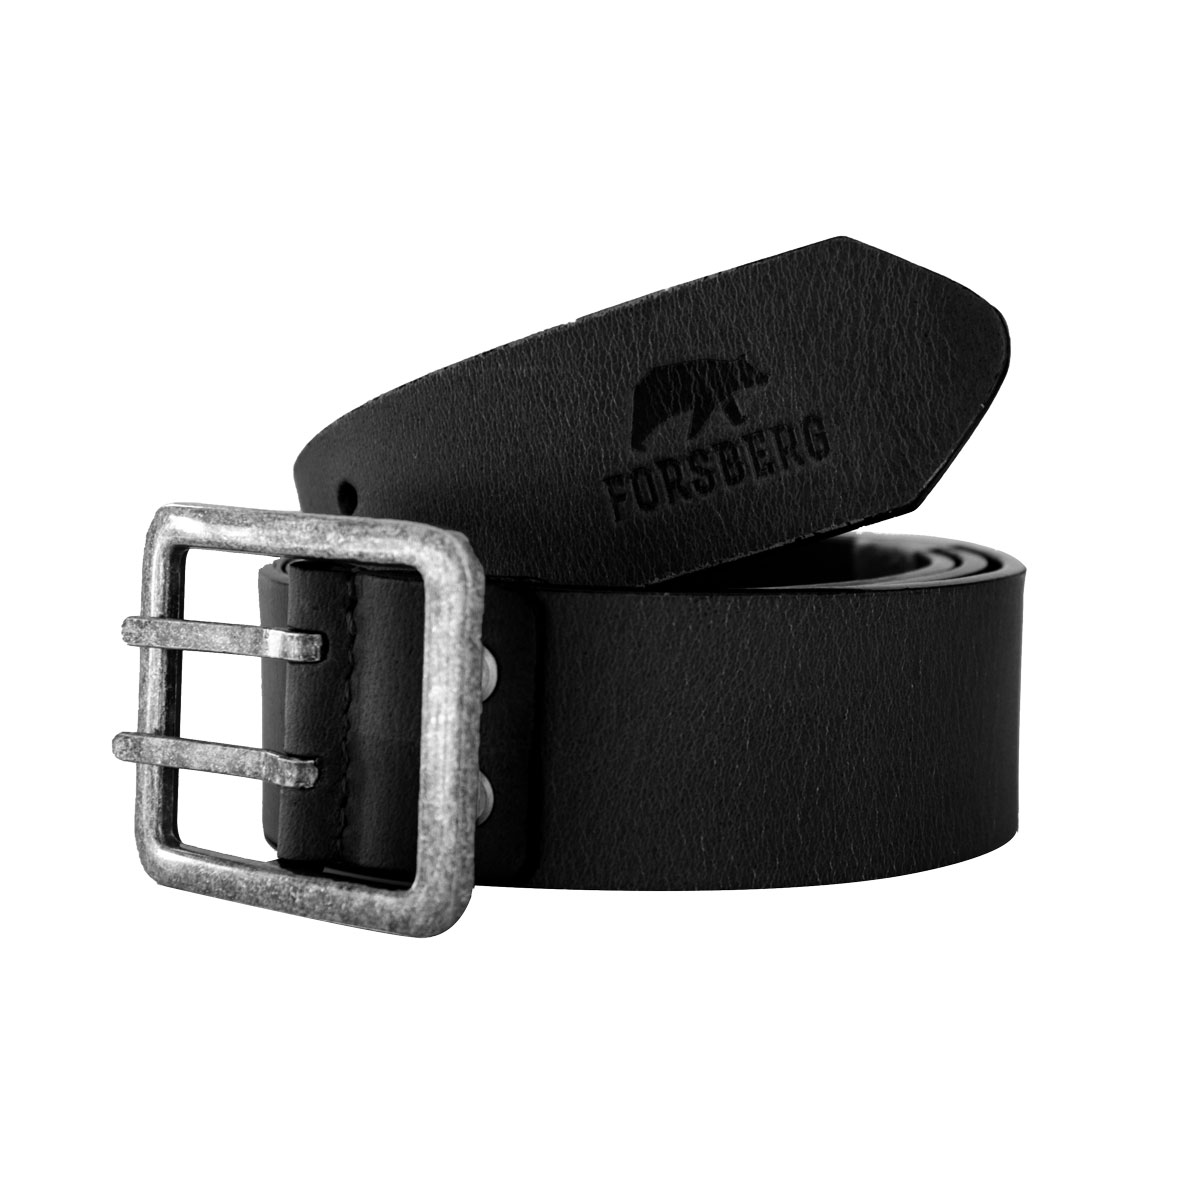 FORSBERG Leather belt with double metal buckle